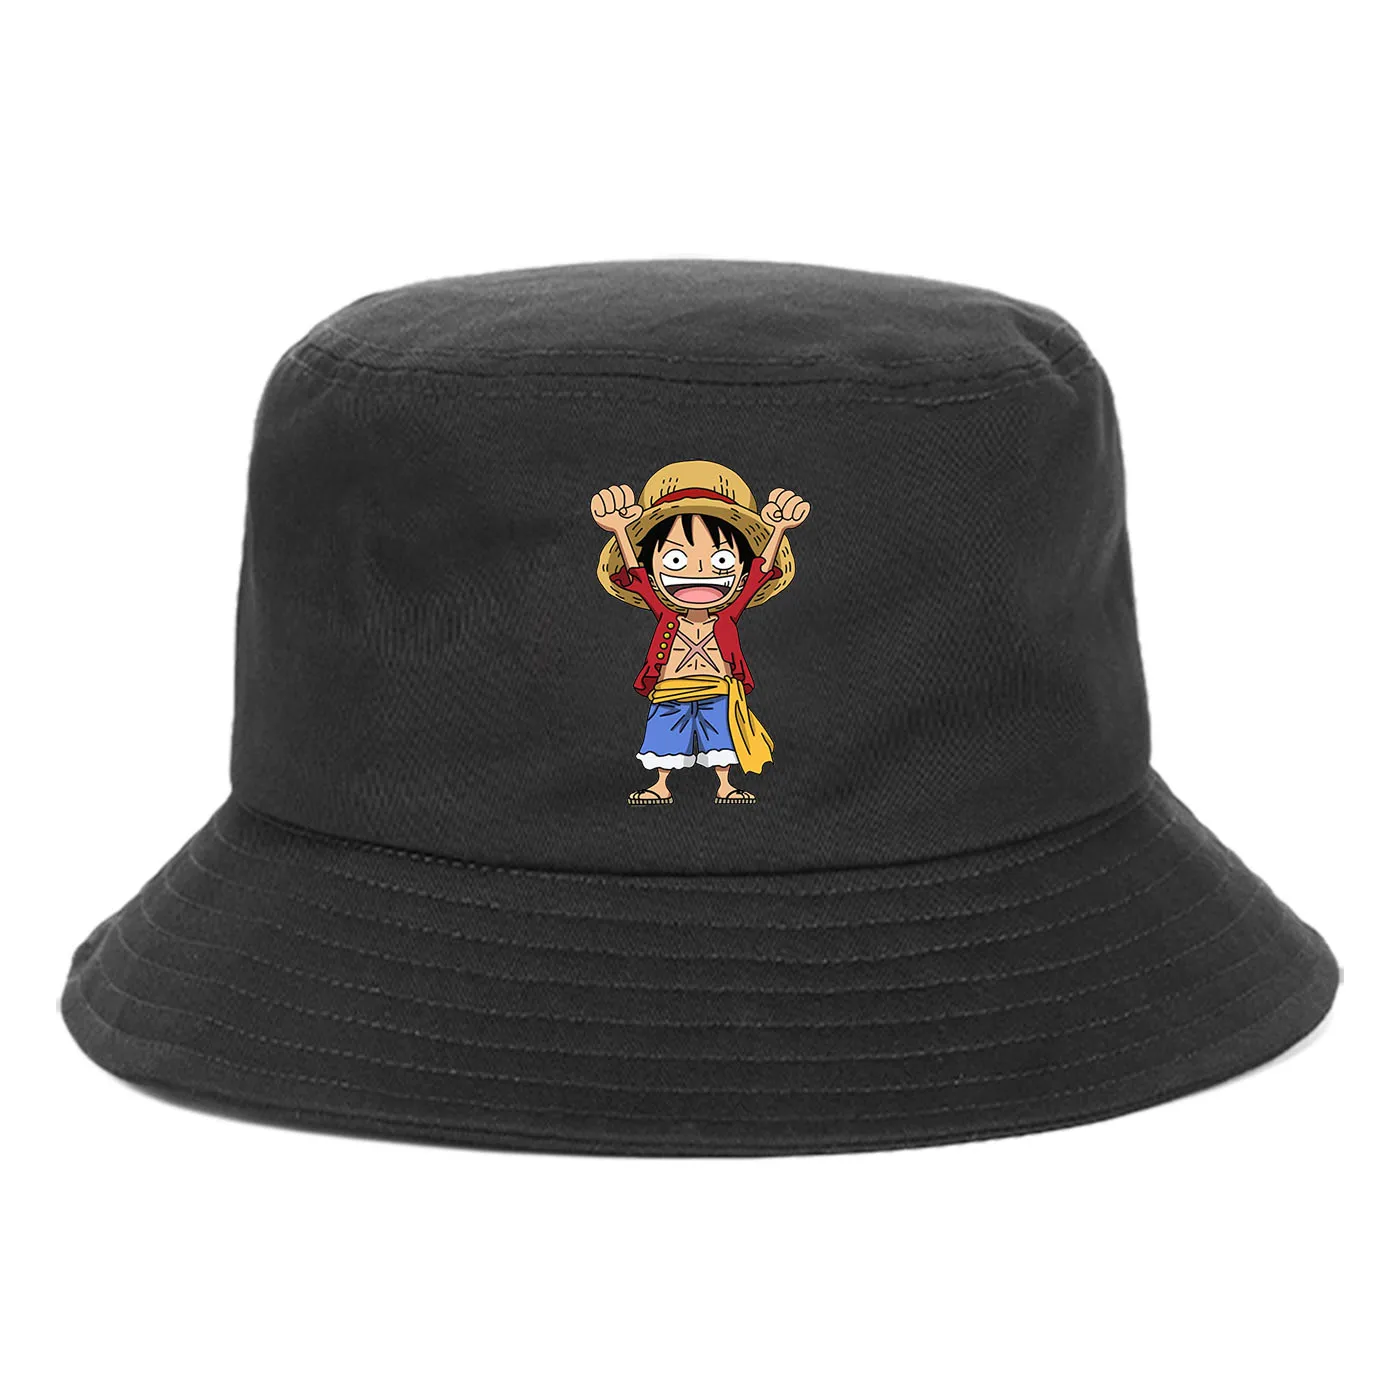 The Pirate King One Piece Fisherman's Hat Unisex | One piece ...